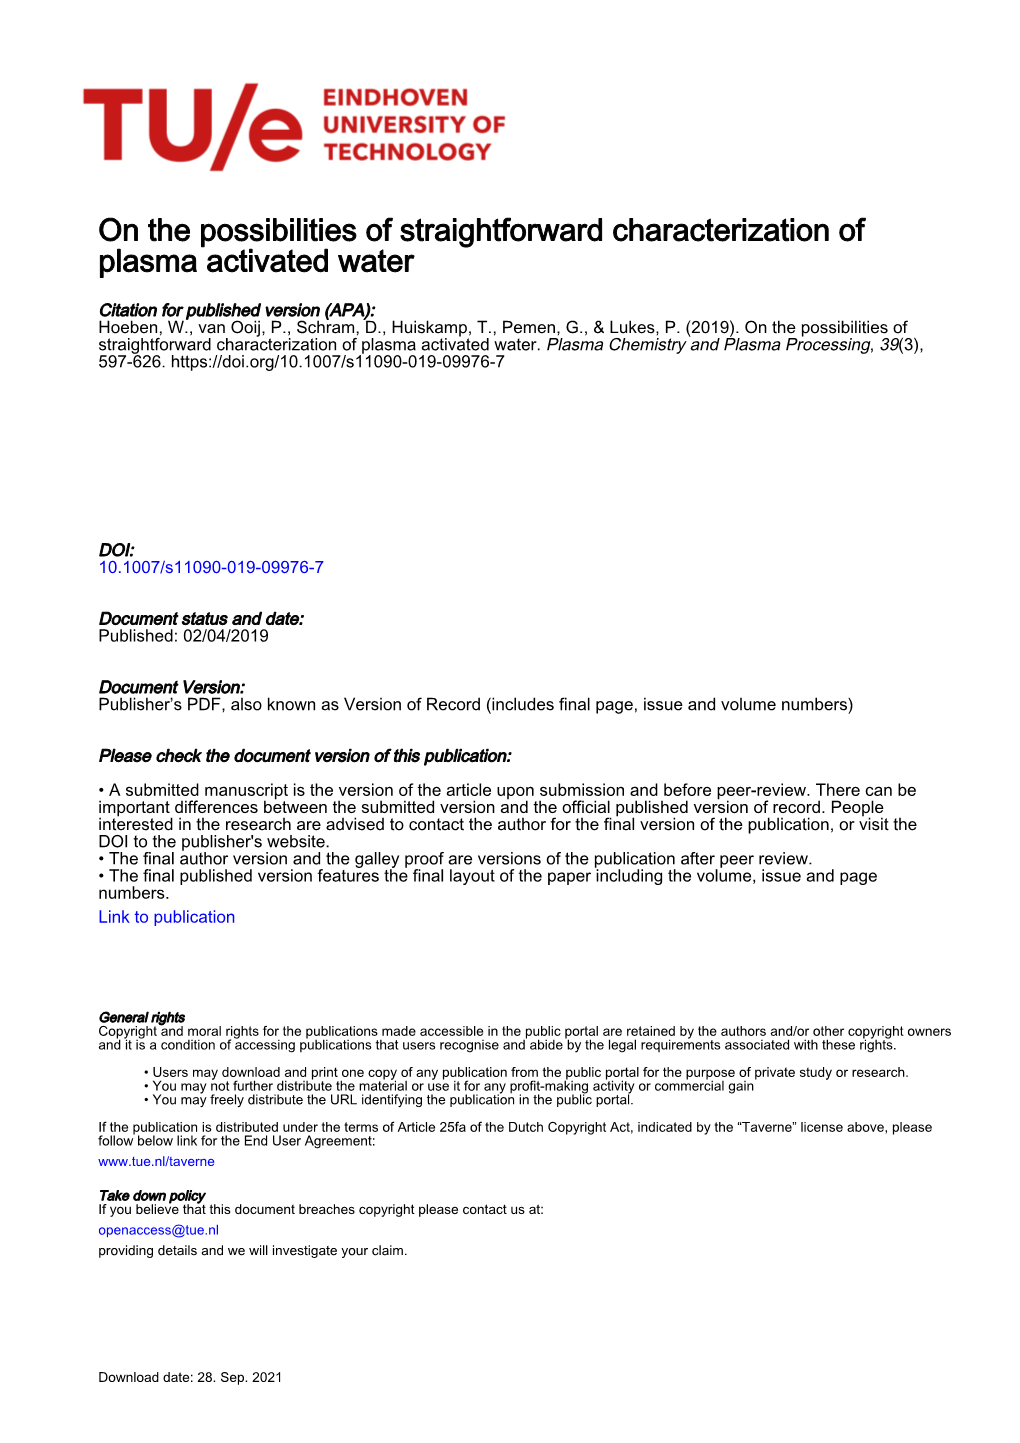 On the Possibilities of Straightforward Characterization of Plasma Activated Water